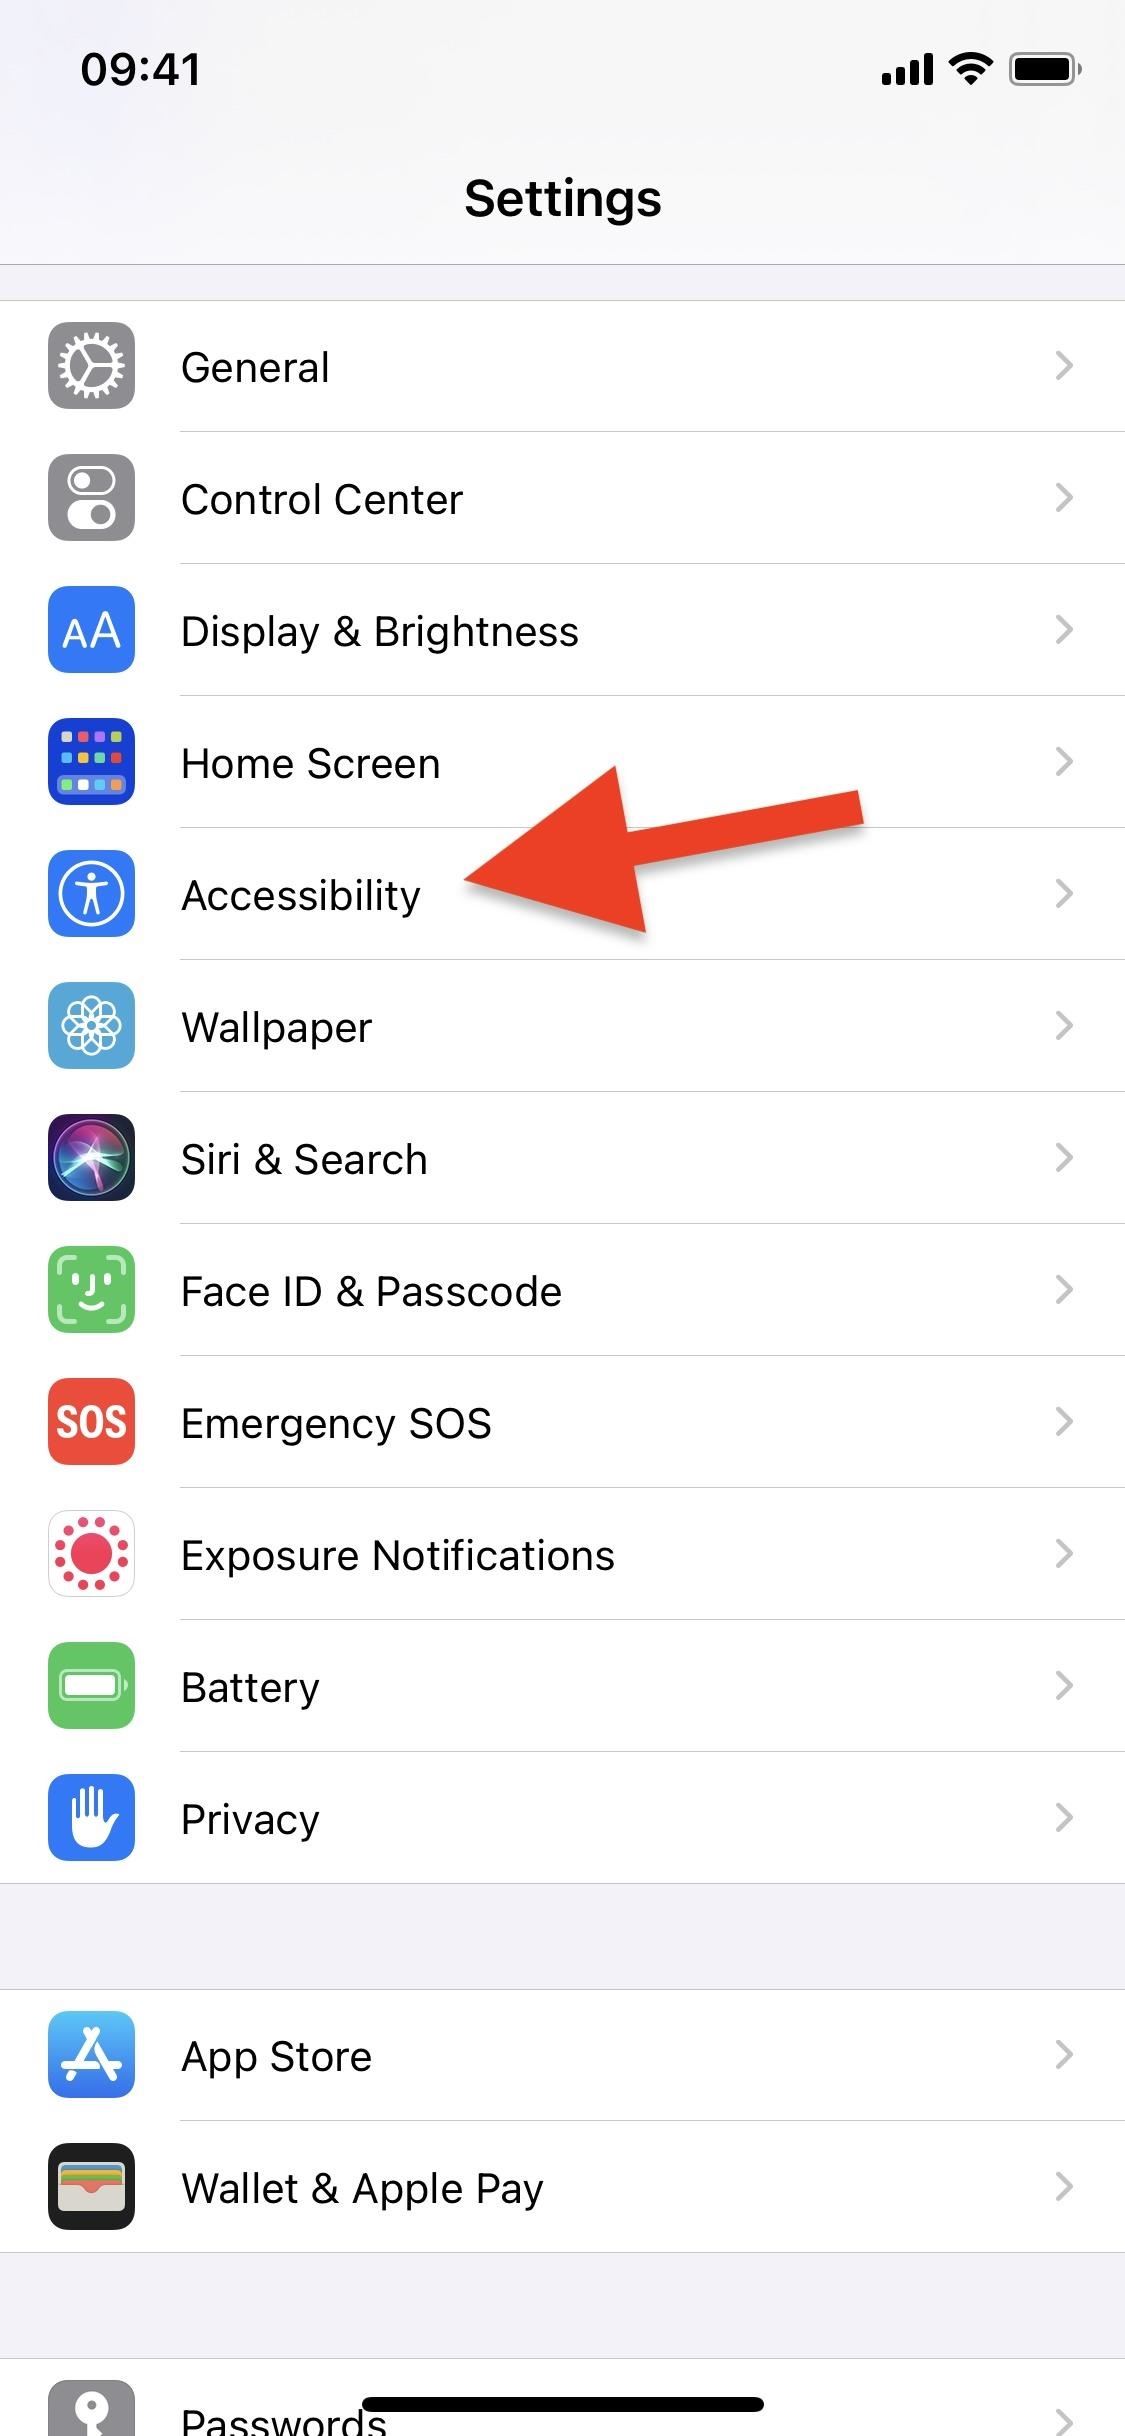 Your iPhone Can Detect & Alert You to Sounds Around You in iOS 14, Like Alarms, Knocking, Cats, Crying & More